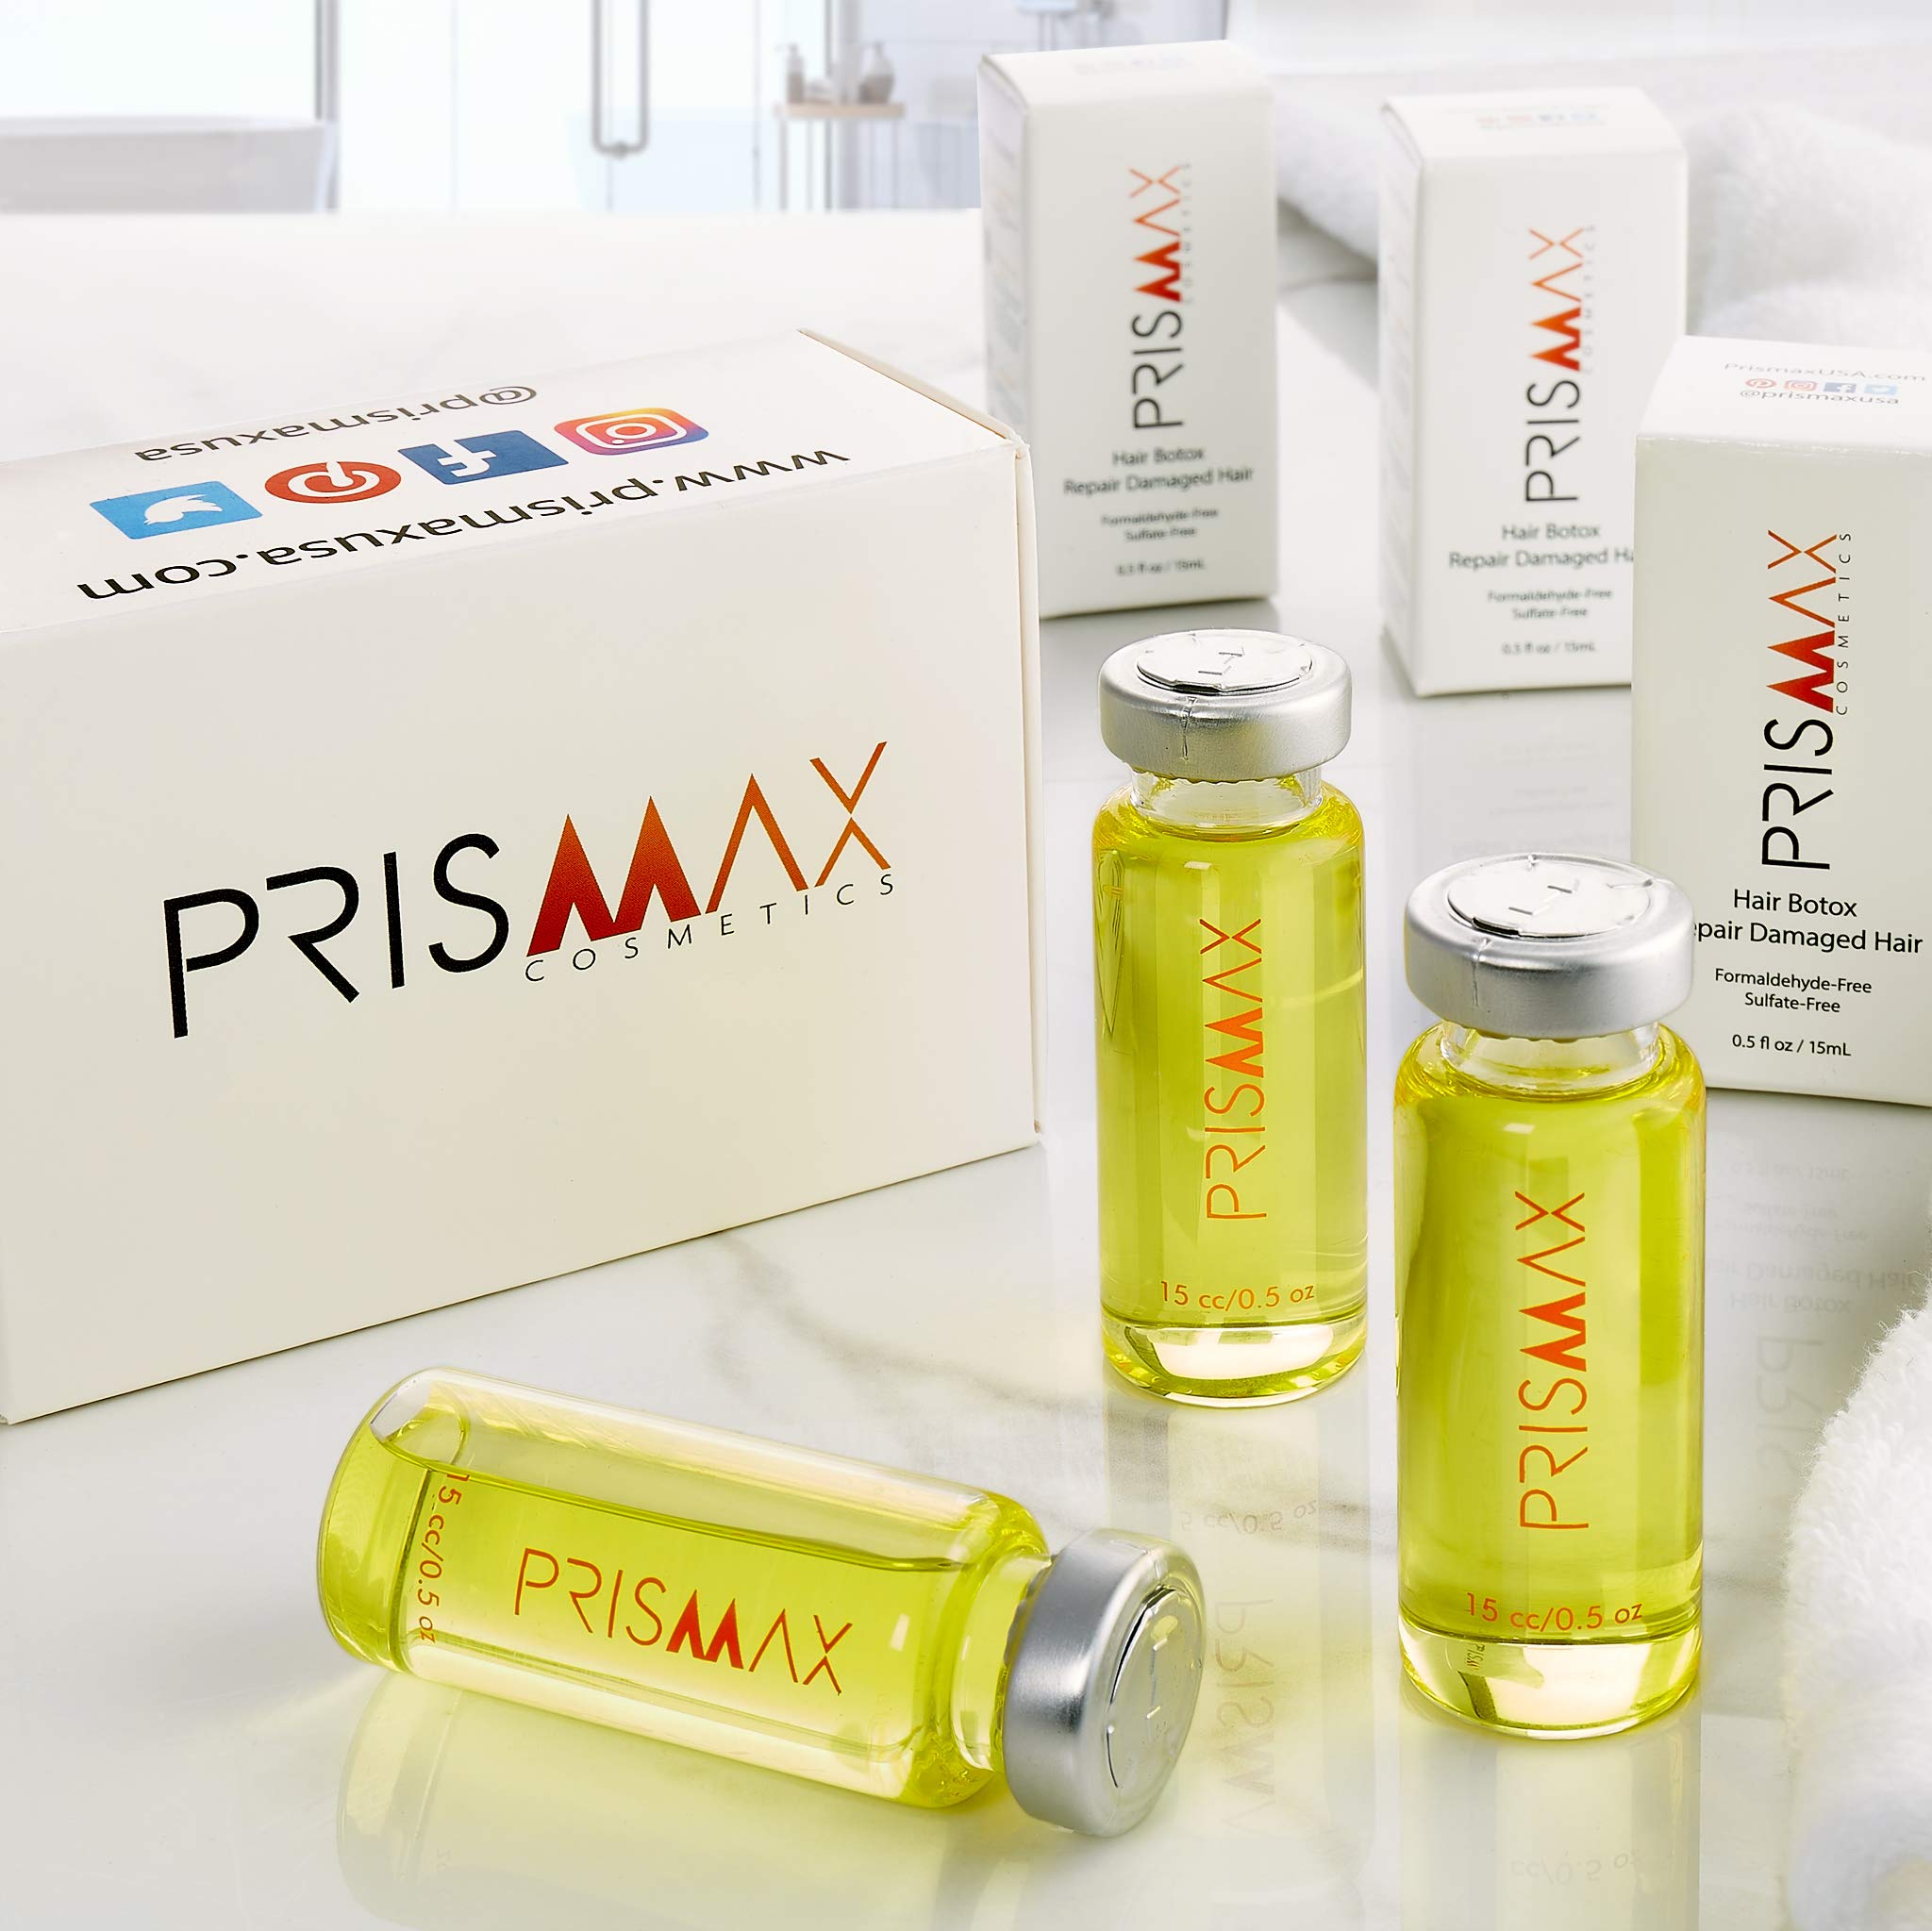 Prismax Nutritivo Deep-Conditioning Hair Treatment - Rejuvenate dry/damaged hair, improve manageability, reduce frizz/porosity with vitamin b6 and b5 panthenol - Formaldehyde-free - 3 Treatments